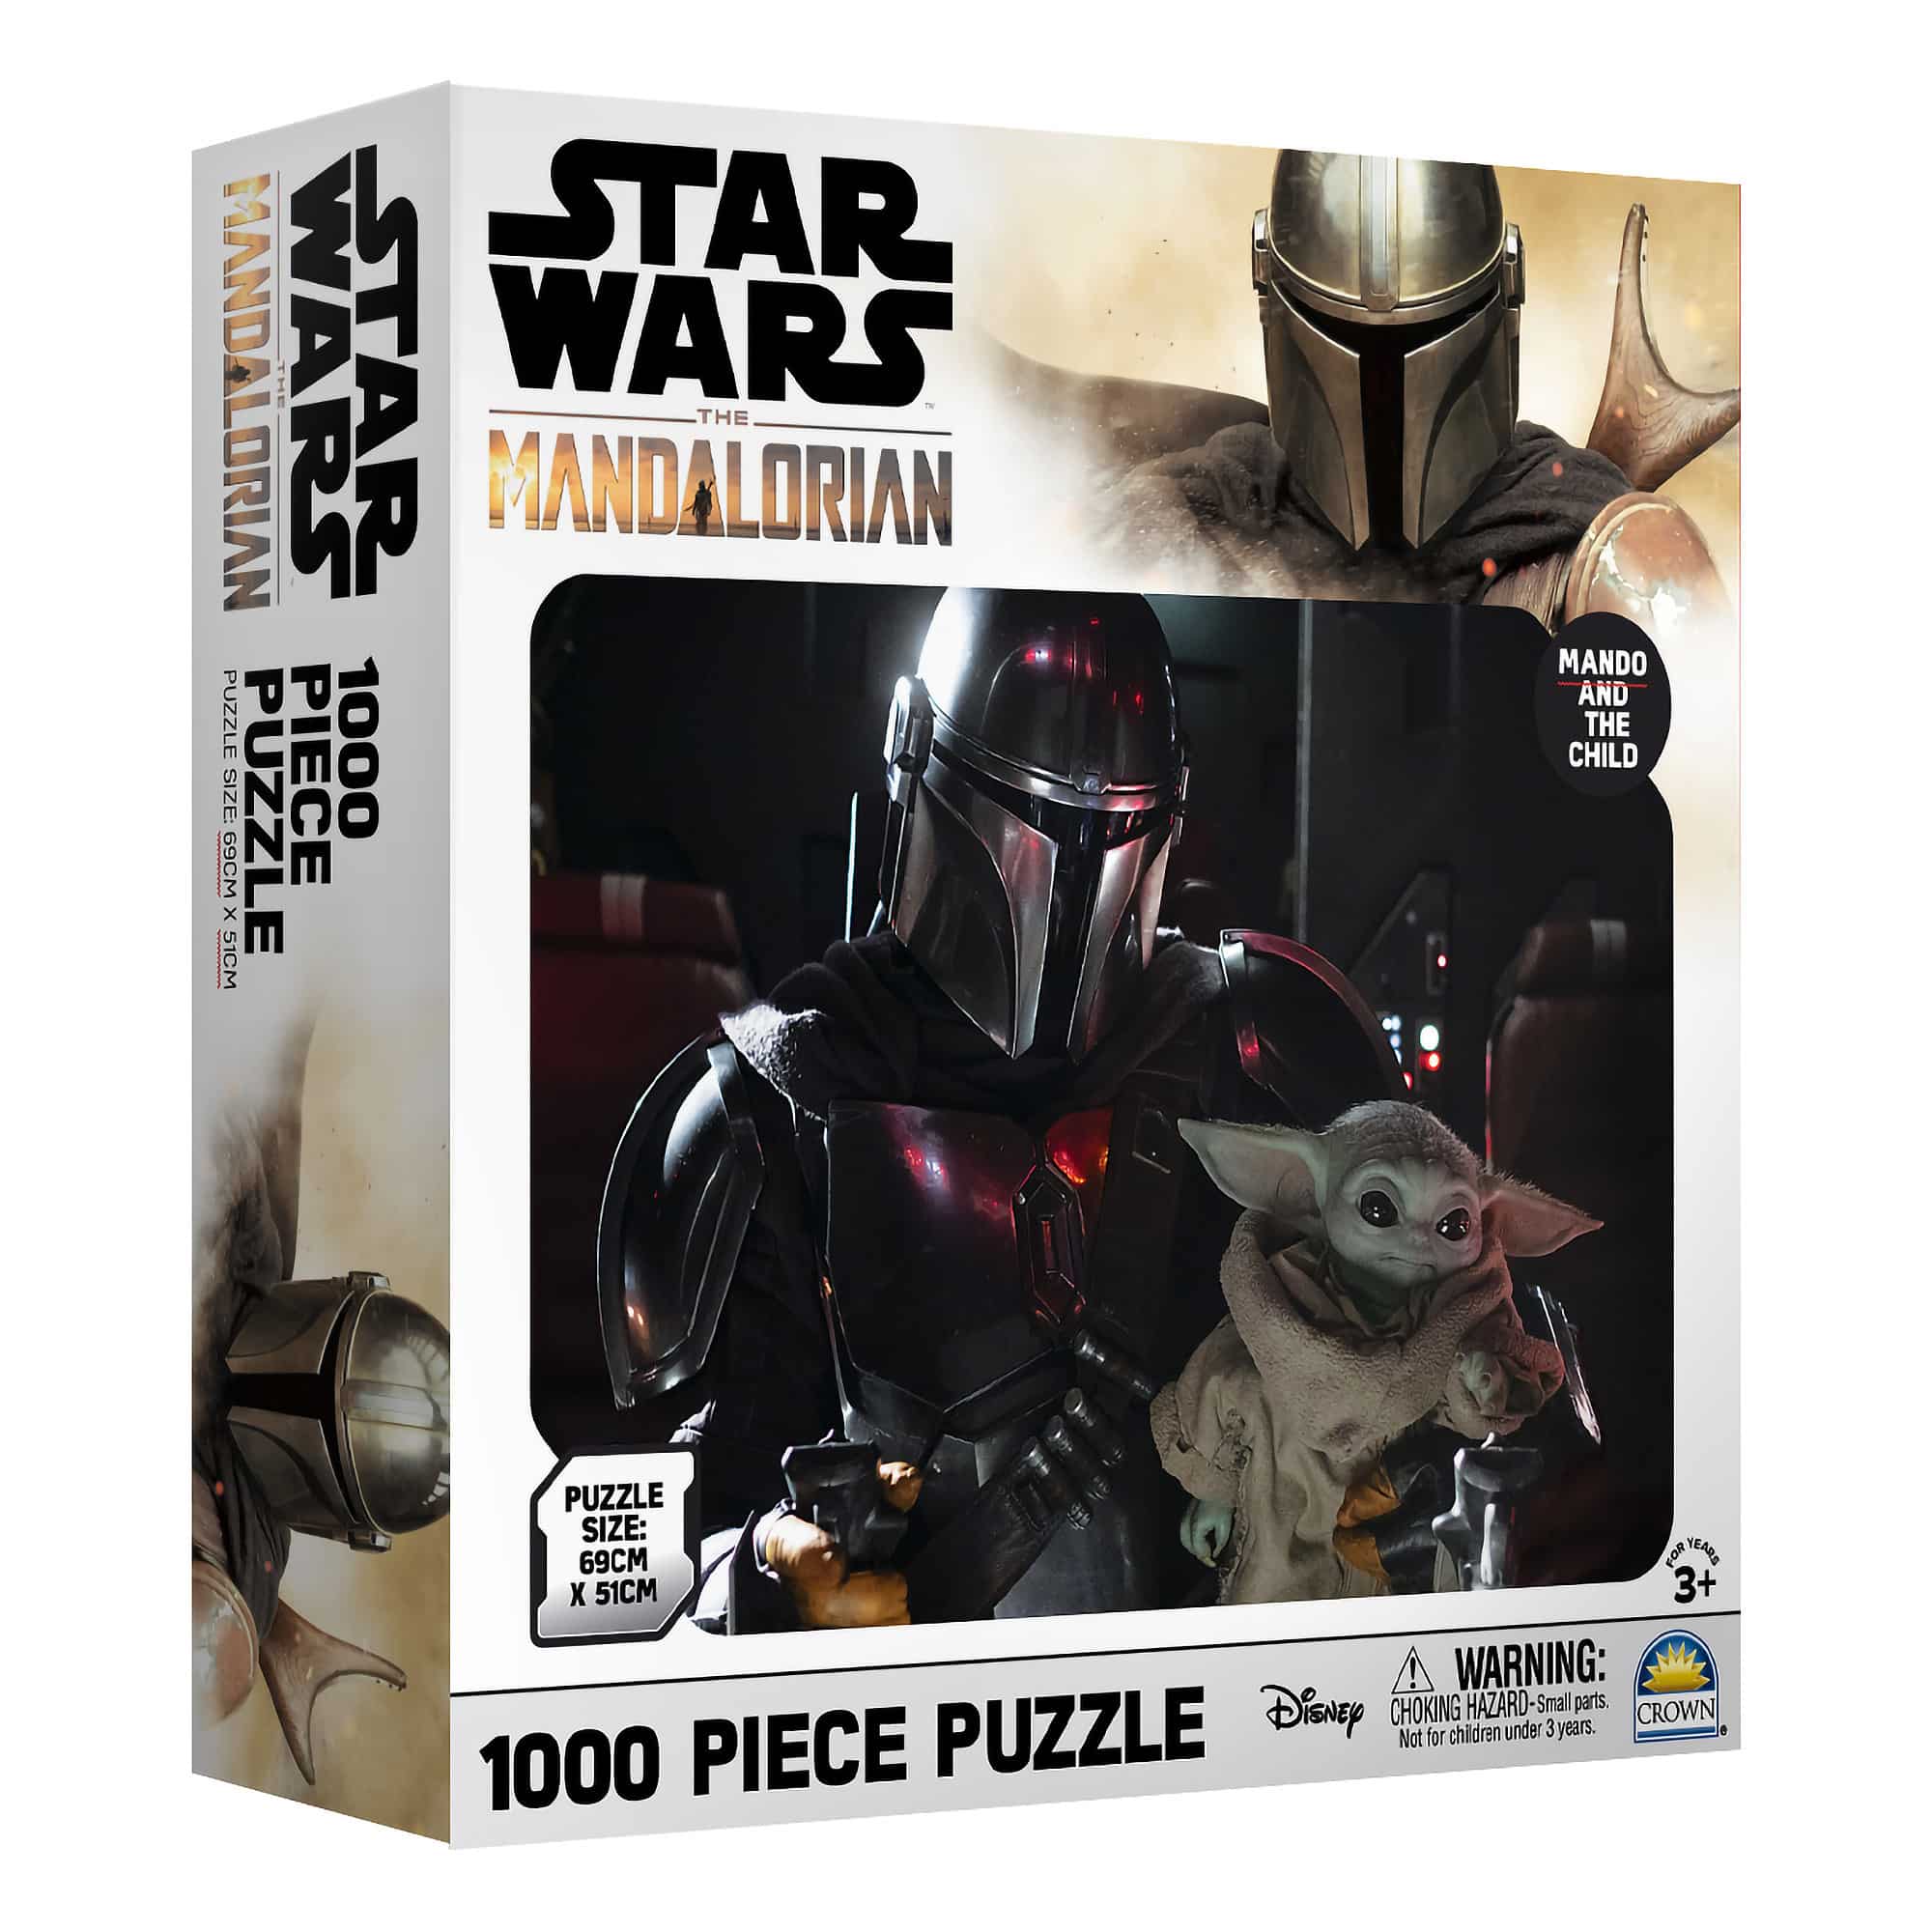 Star Wars - The Mandalorian - 1000 Piece Puzzle - The Mandalorian With Baby Yoda